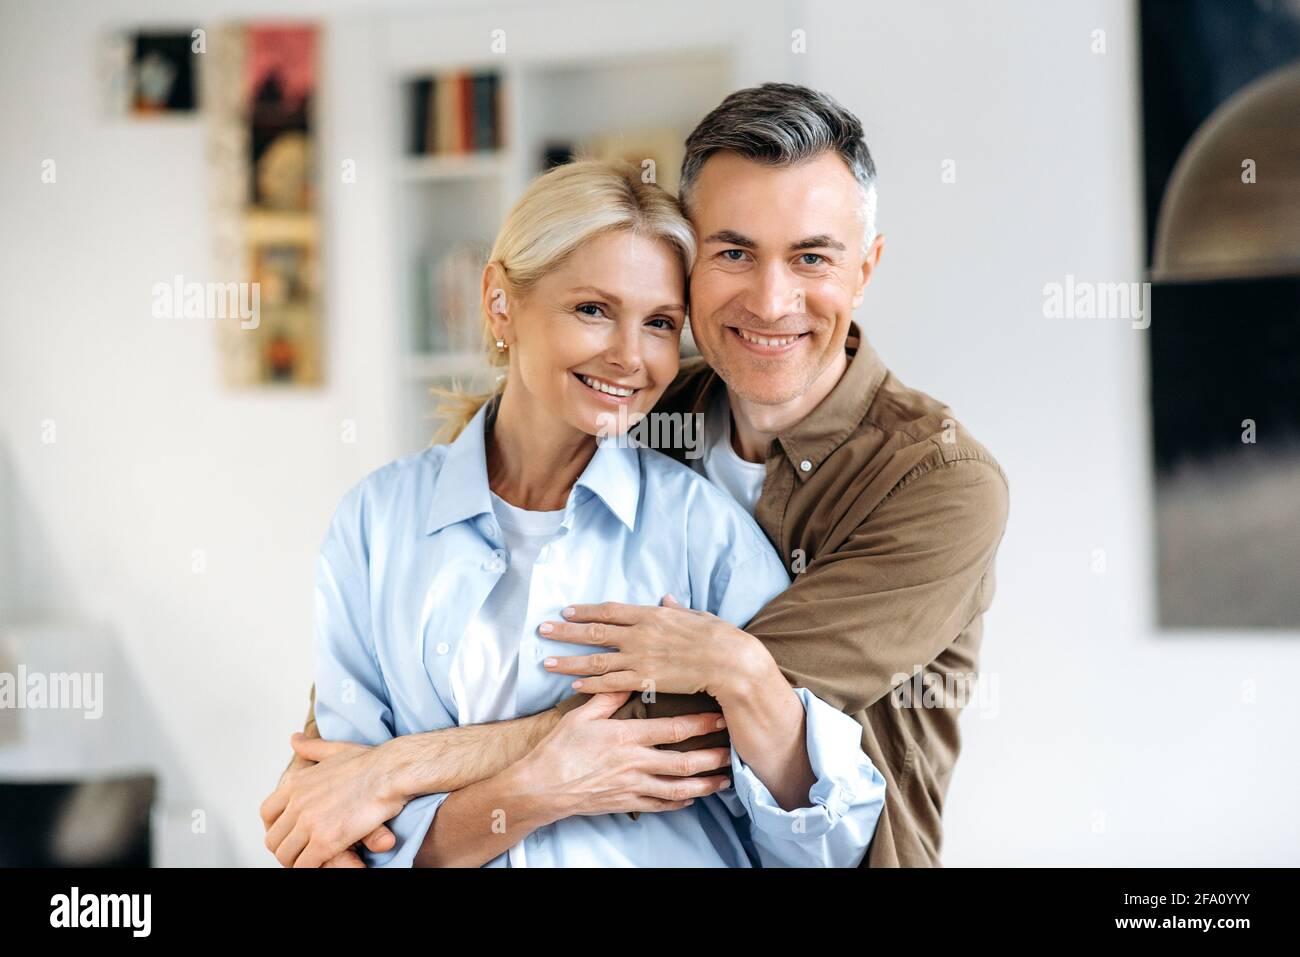 Family portrait. Close-up portrait of joyful happy mature caucasian married couple, stylishly dressed, husband and wife standing in living room, gently hugging each other, looking at camera, smiling Stock Photo